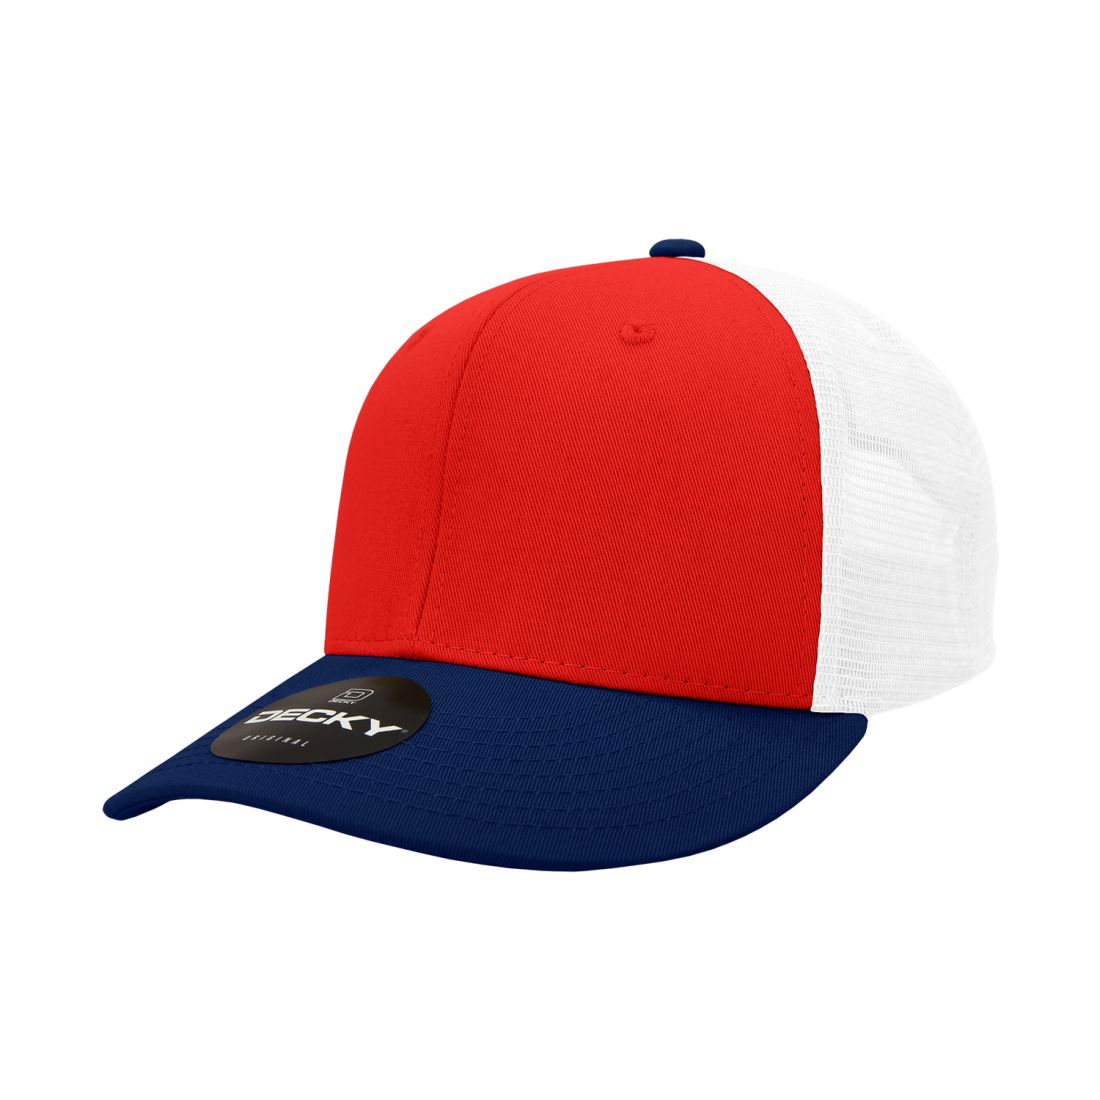 Navy/Red/White color variant